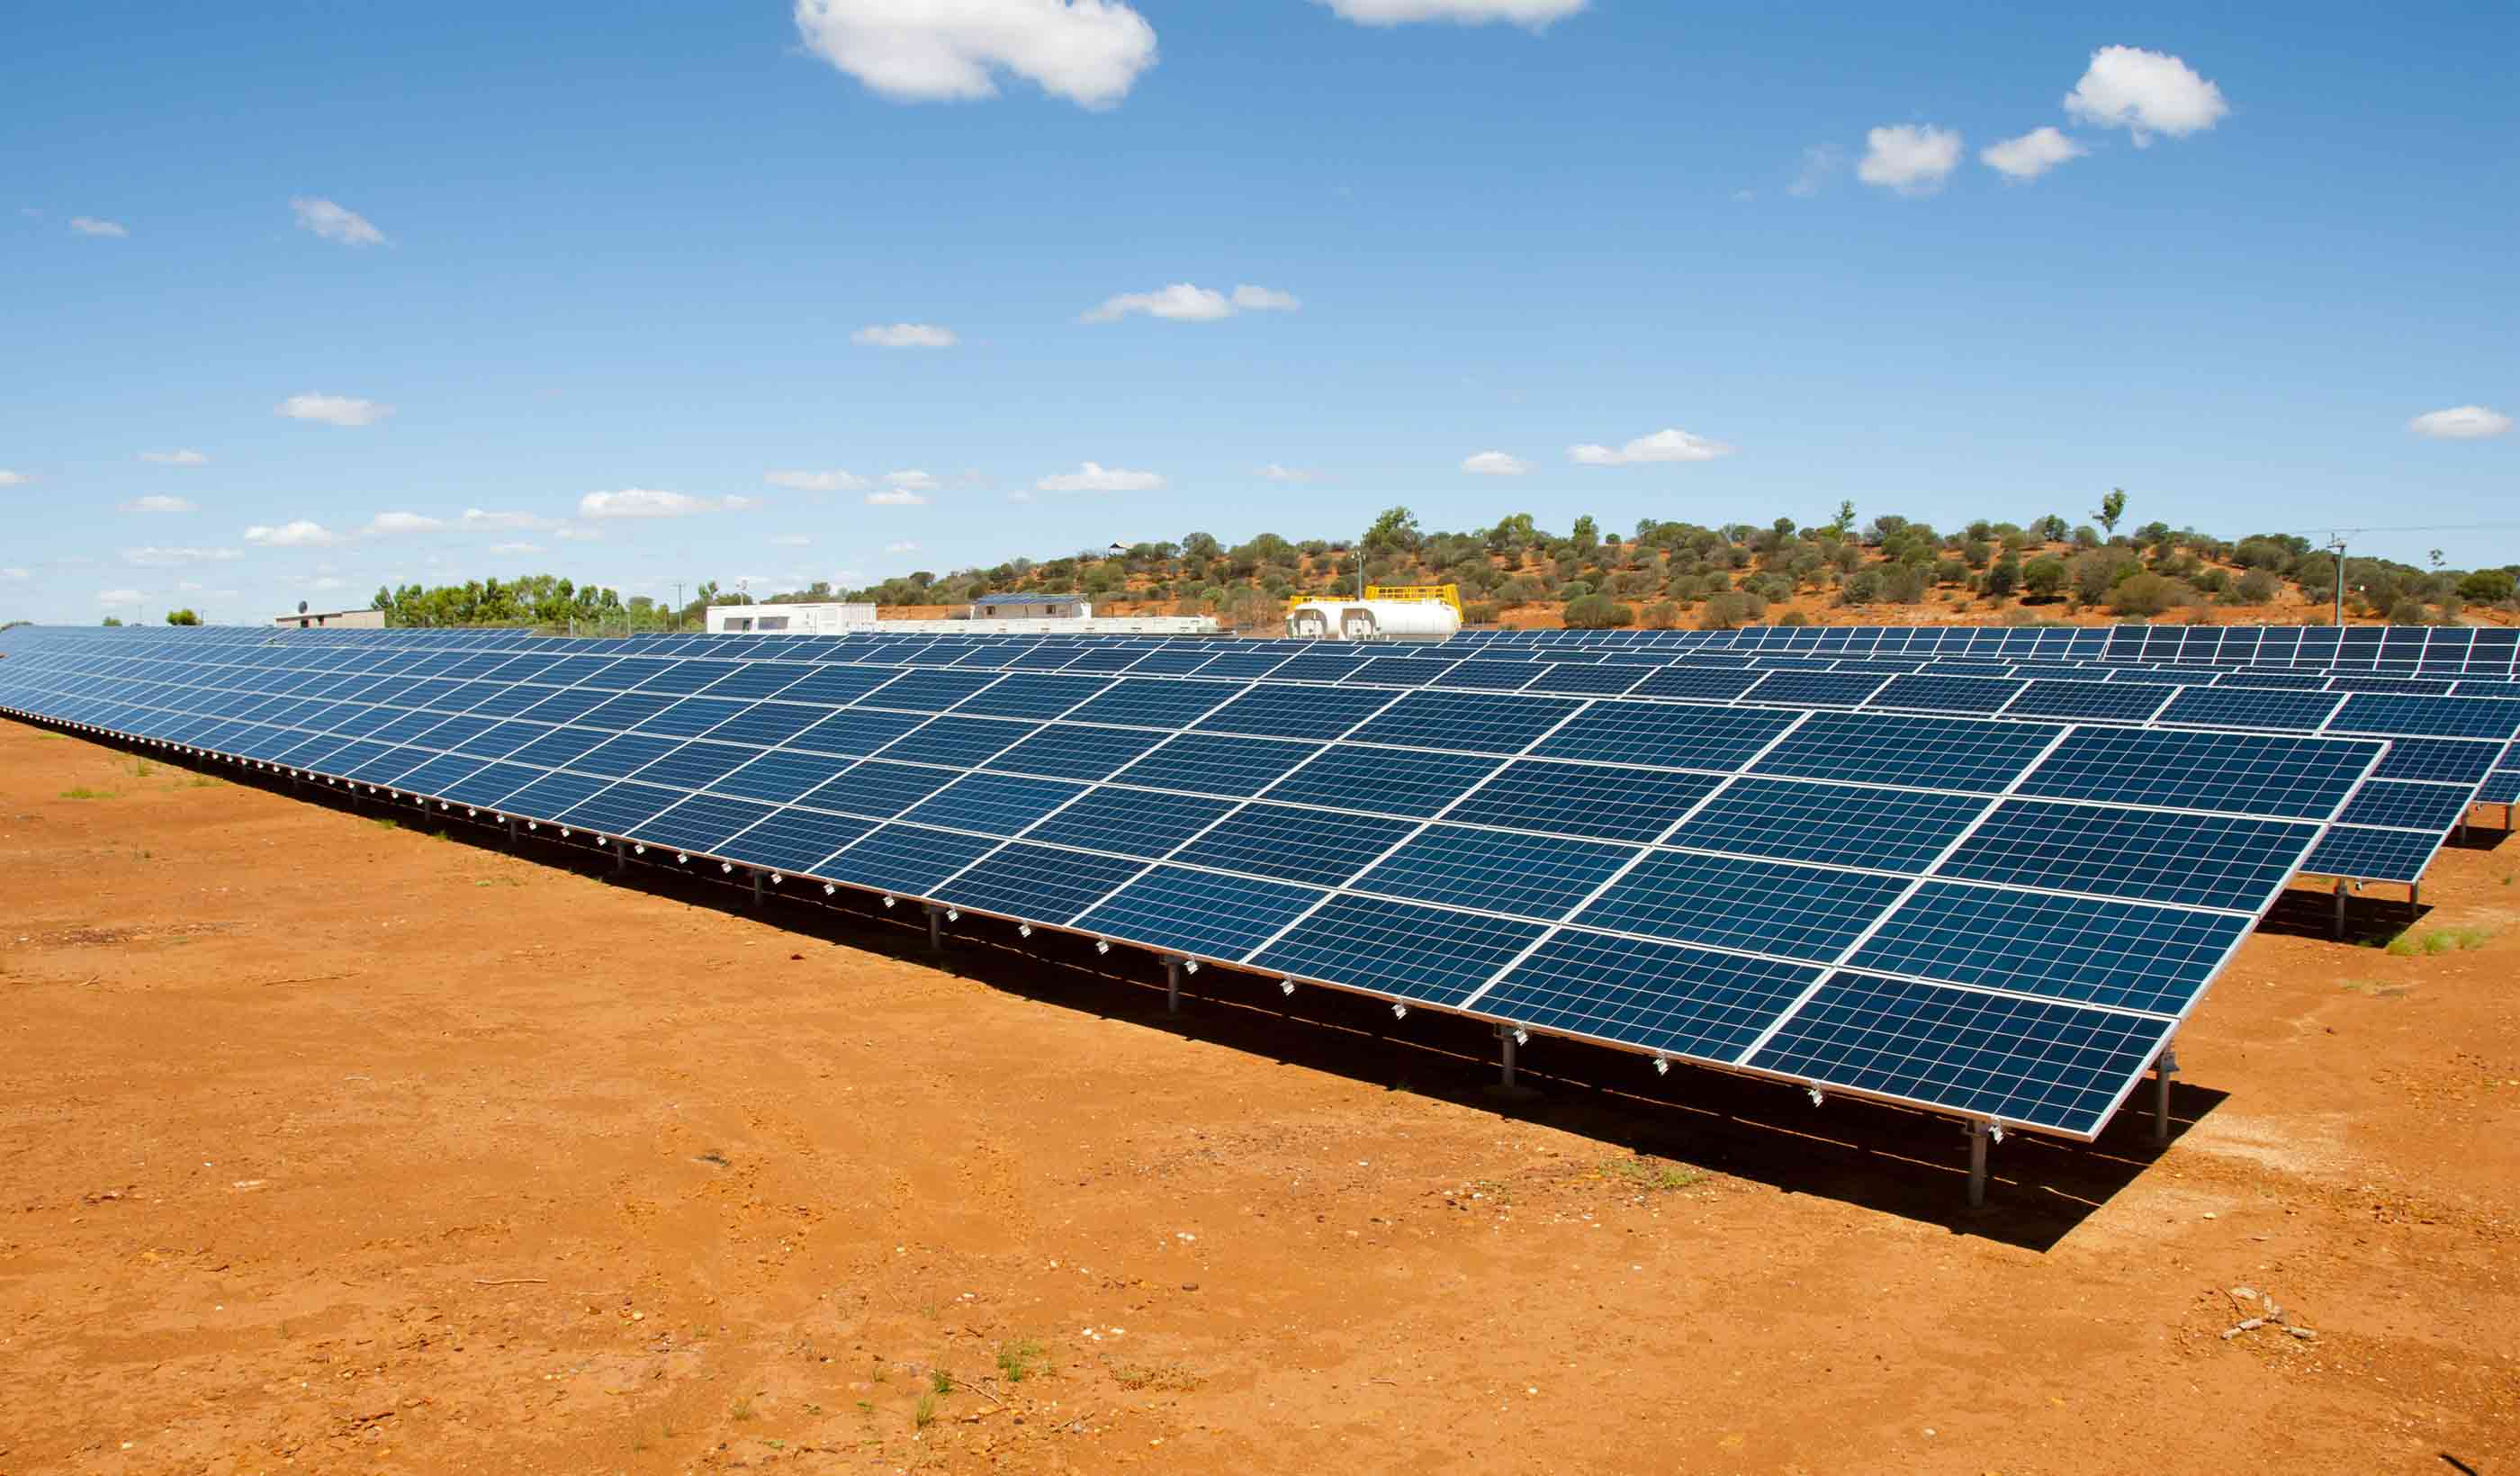 The Northern Goldfields Solar Project